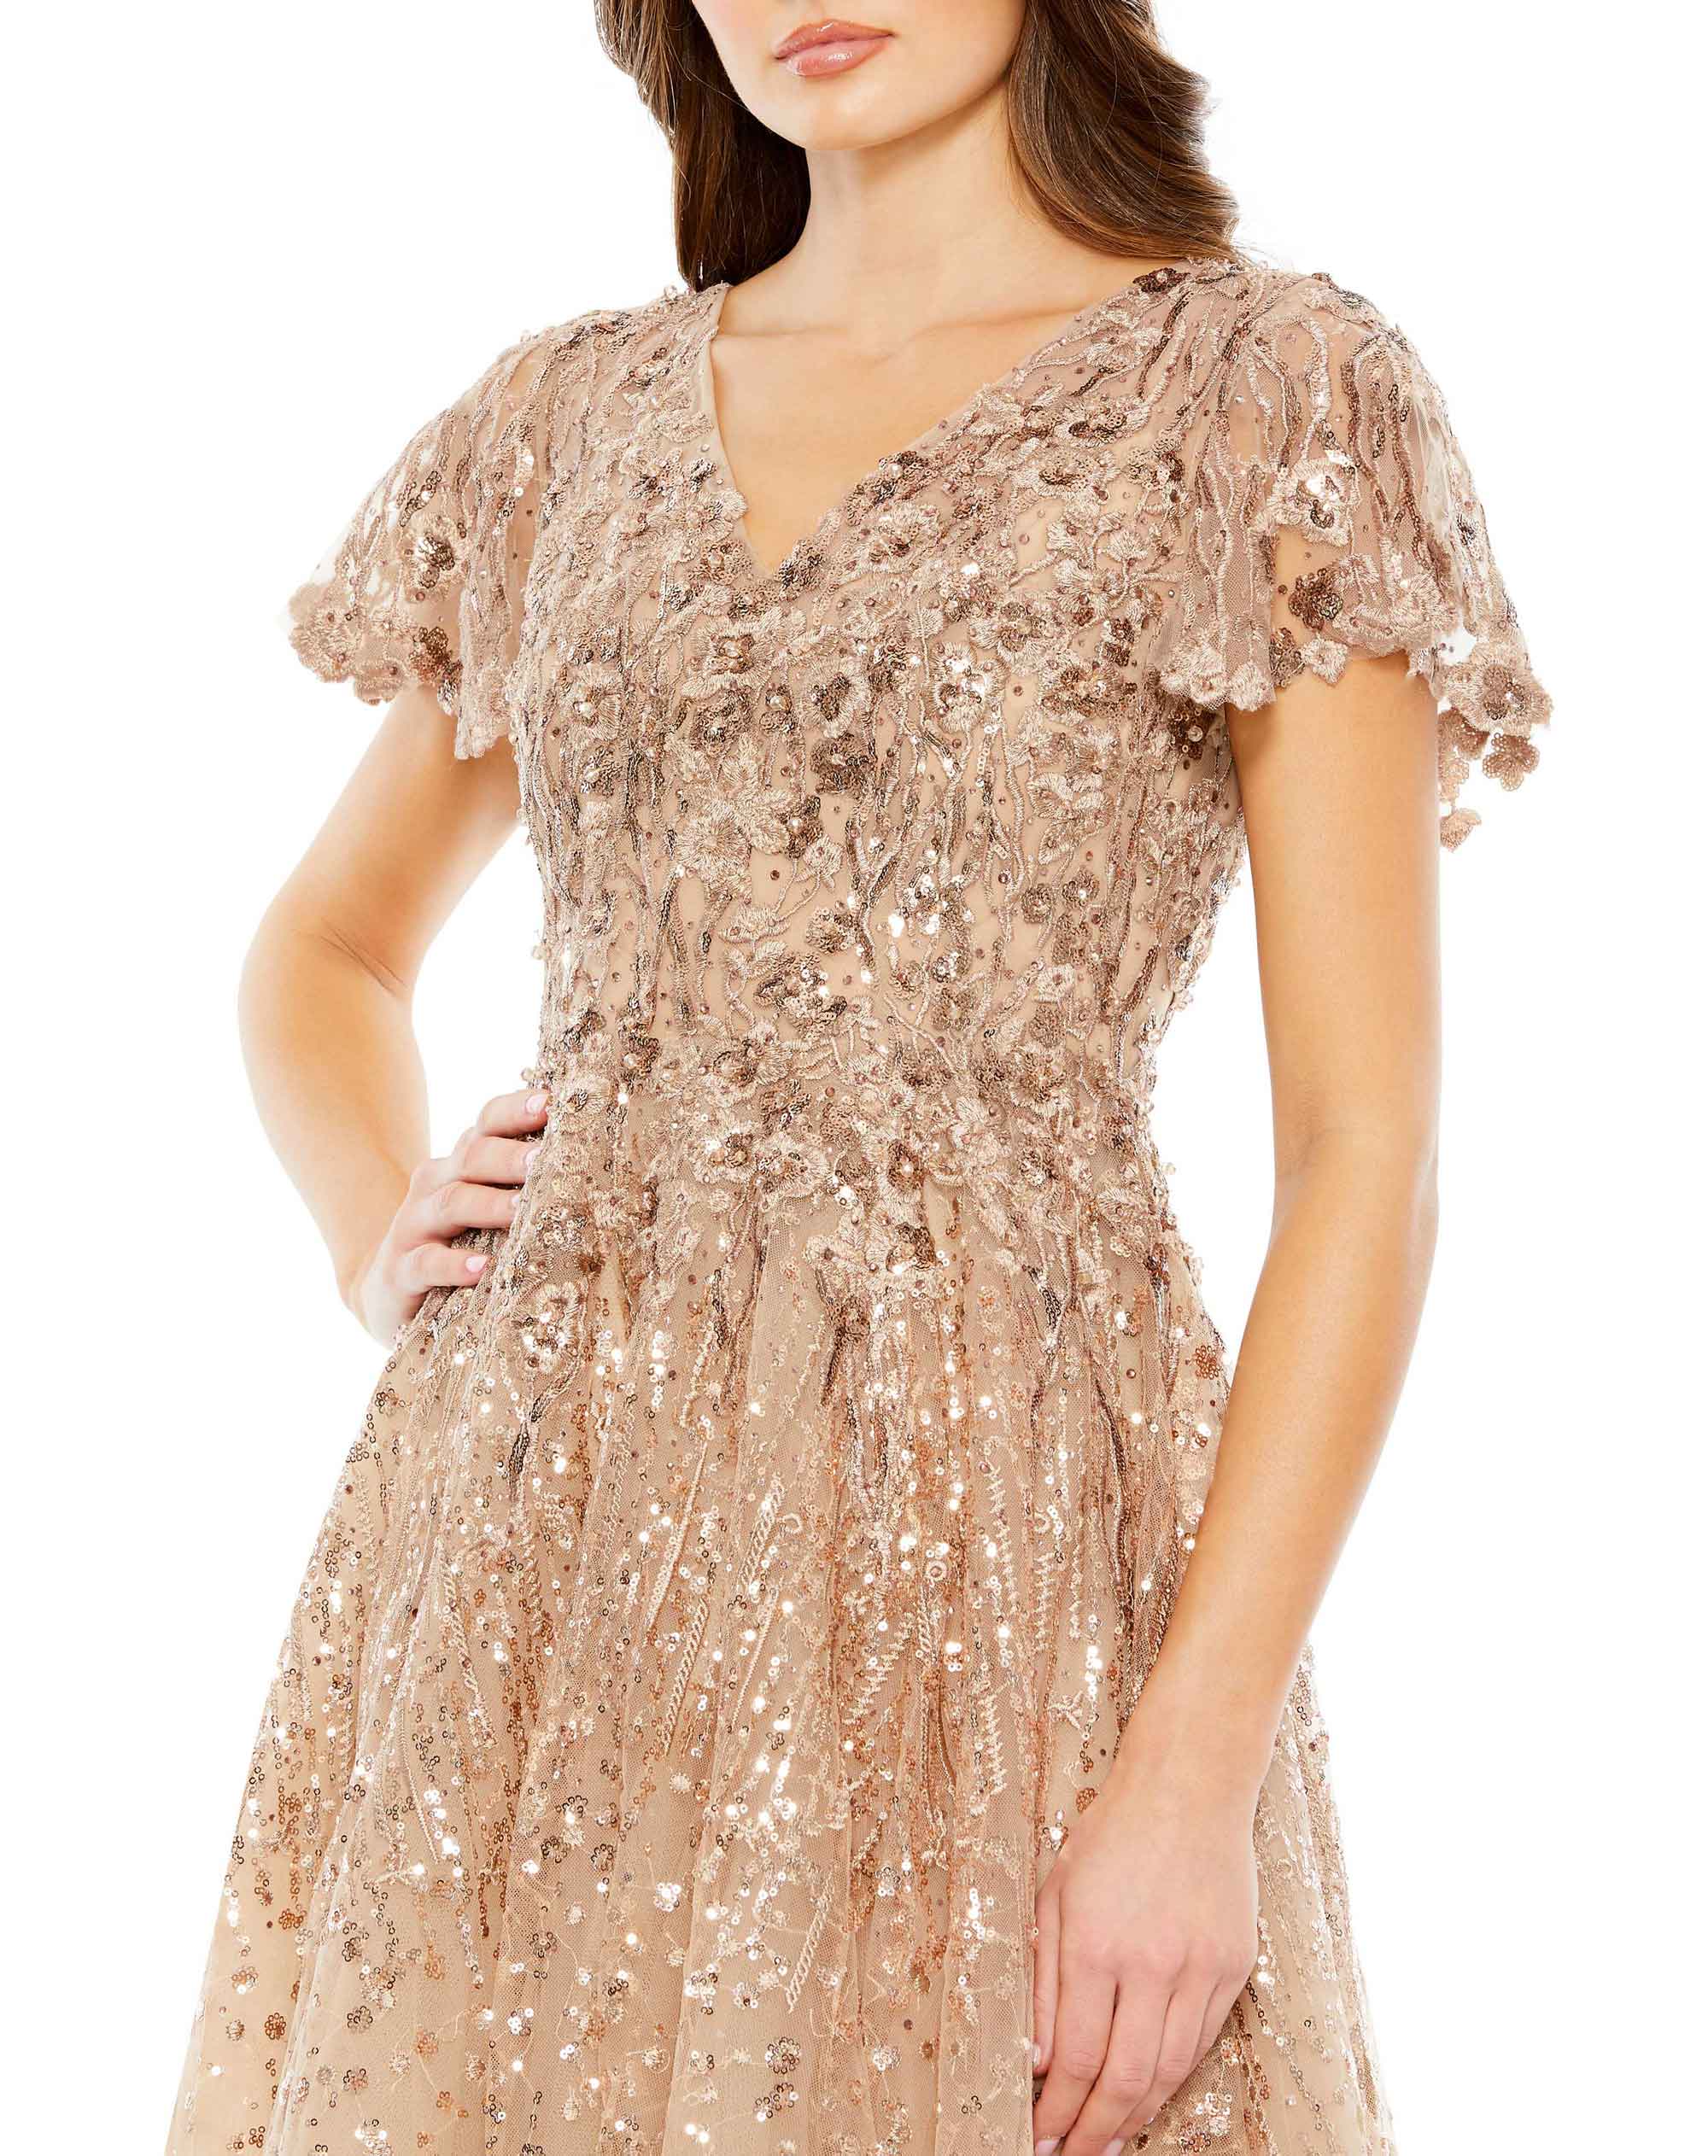 Embellished Butterfly Fit and Flare Tea-Length Dress